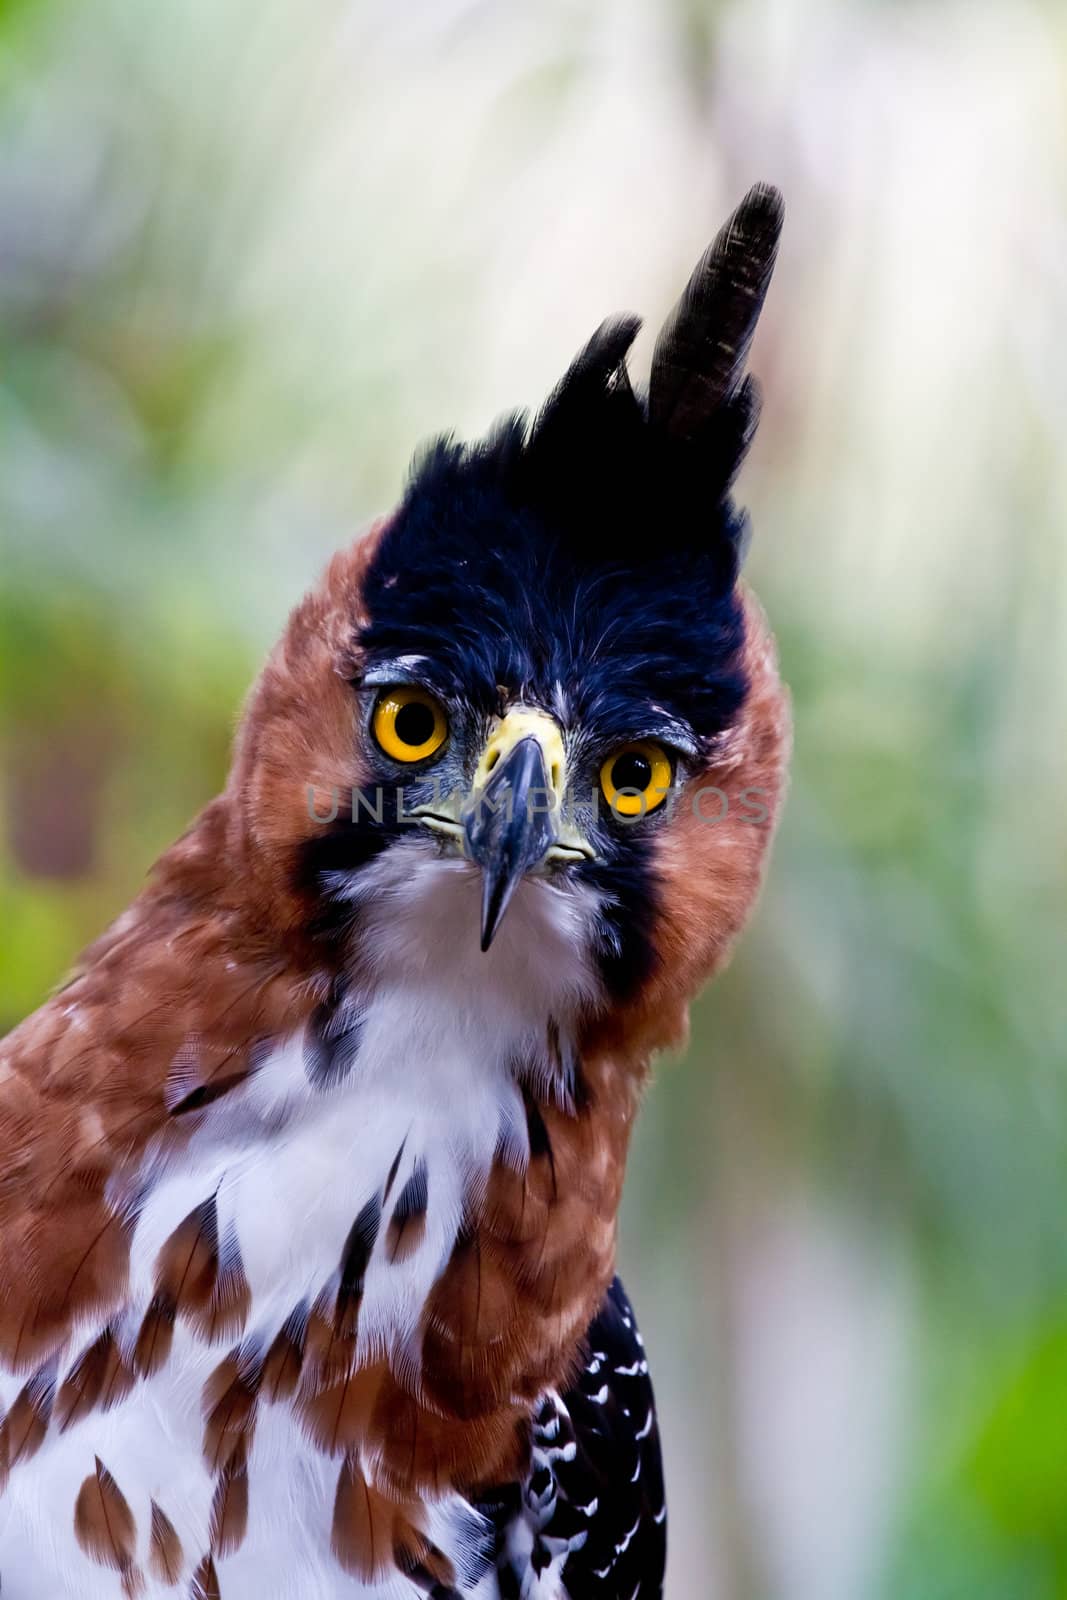 The amazing big yellow eyes of the ornate hawk eagle catch sight of the photographer deep in Amazon jungle. Peru.